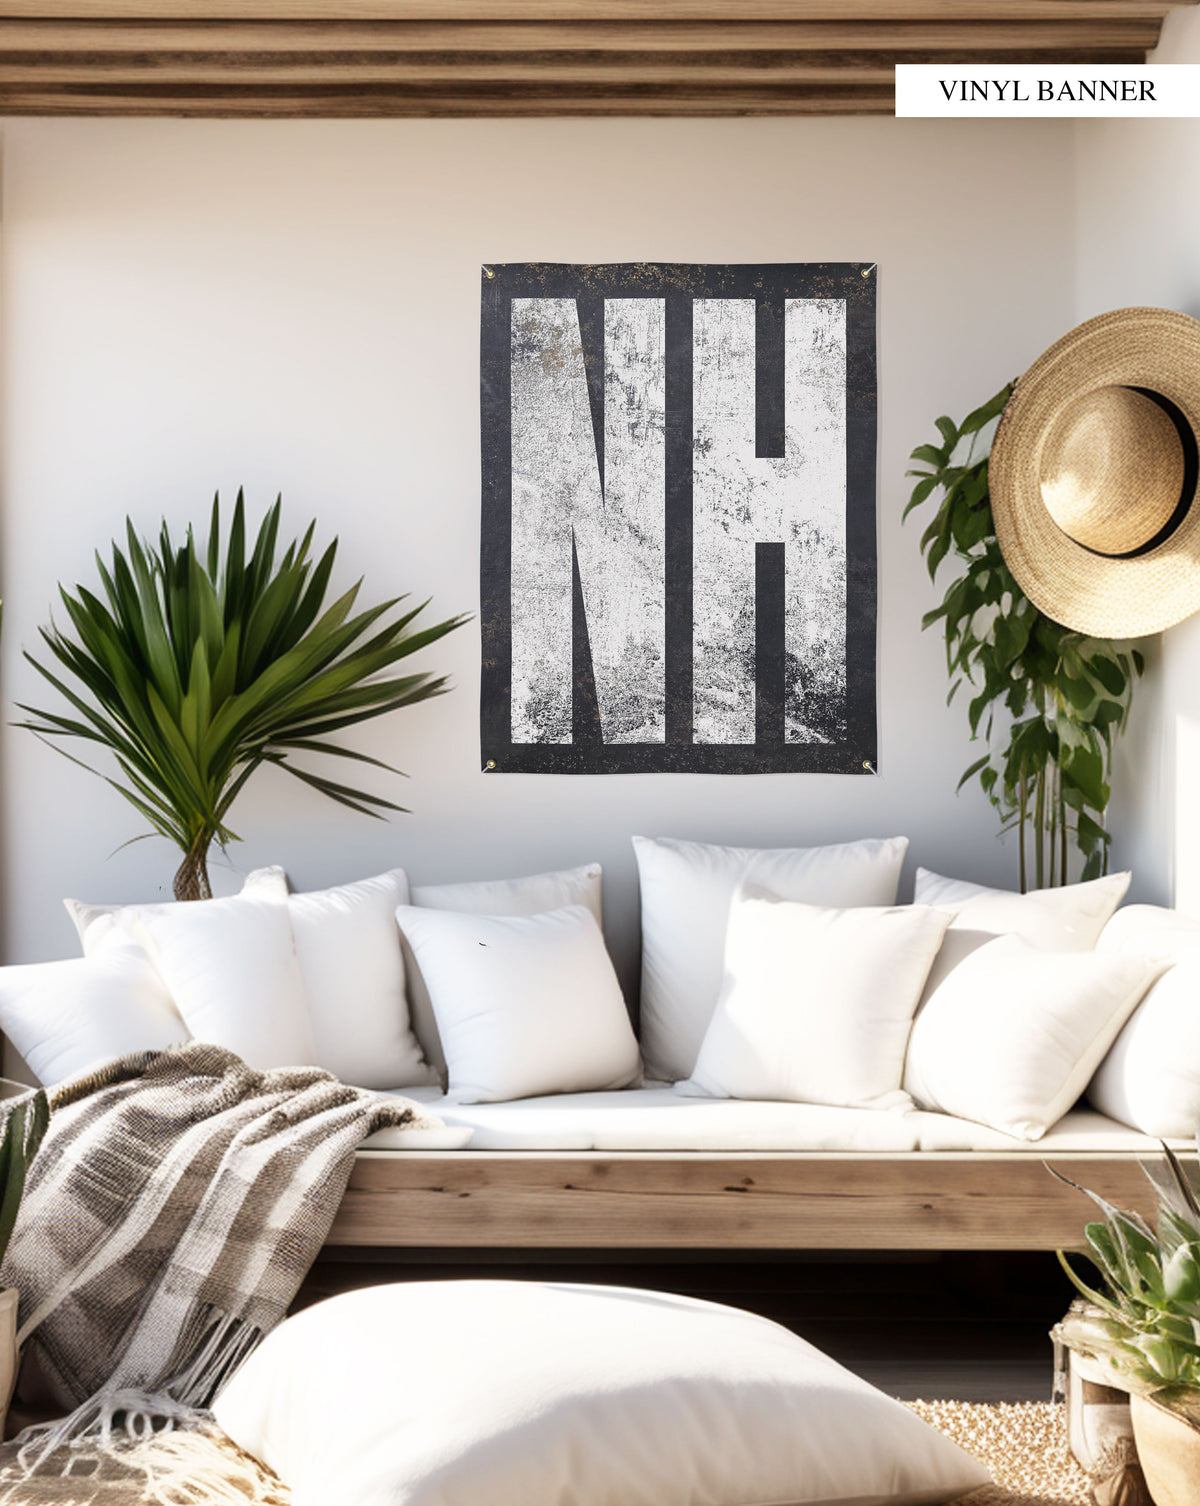 "Sleek 'NH' banner, featuring crisp white on black design, perfect for highlighting New Hampshire's unique spirit in a durable, weatherproof format for all settings."